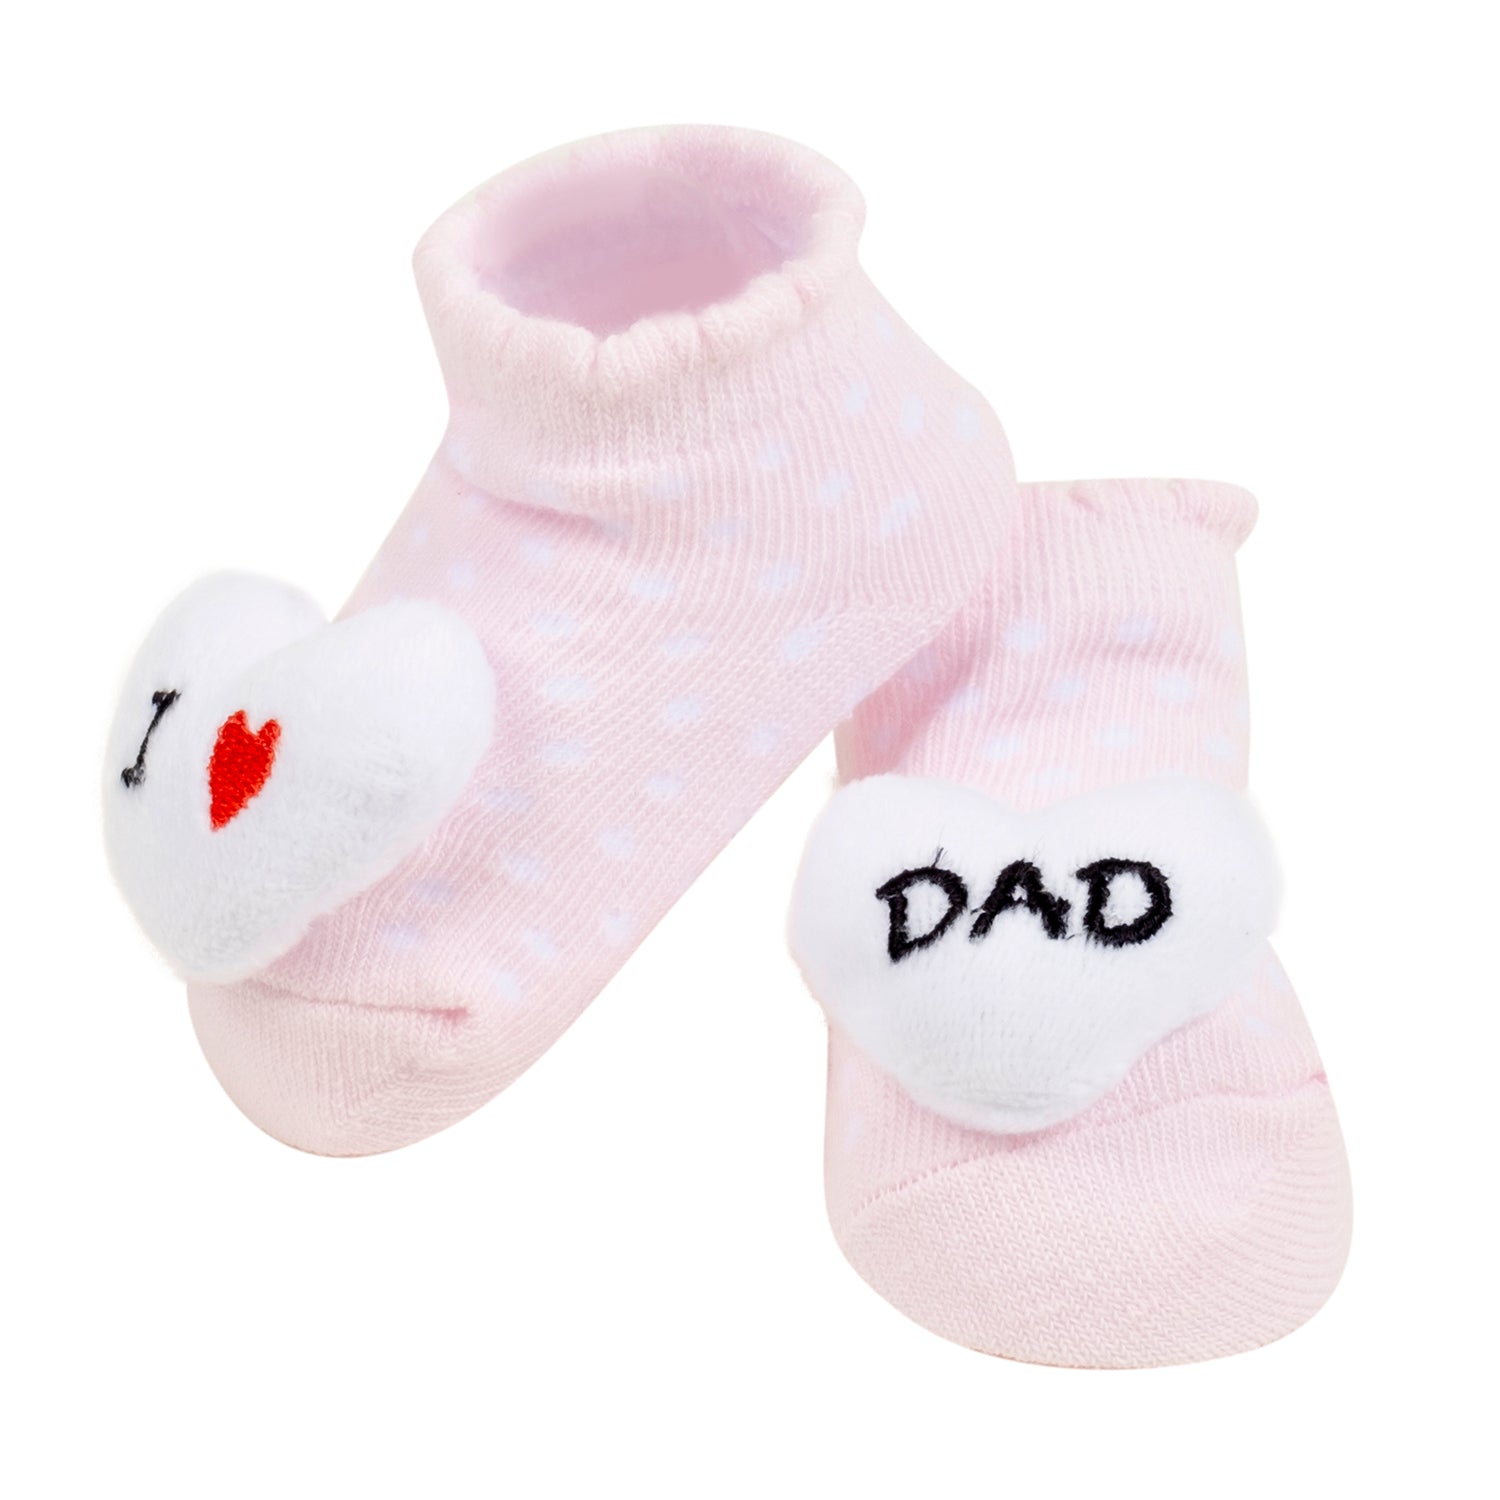 Baby Moo 3D I Love Maa And Paa Cotton Ankle Length Fancy Infant Gift Set of 2 Socks Booties - Grey, Pink